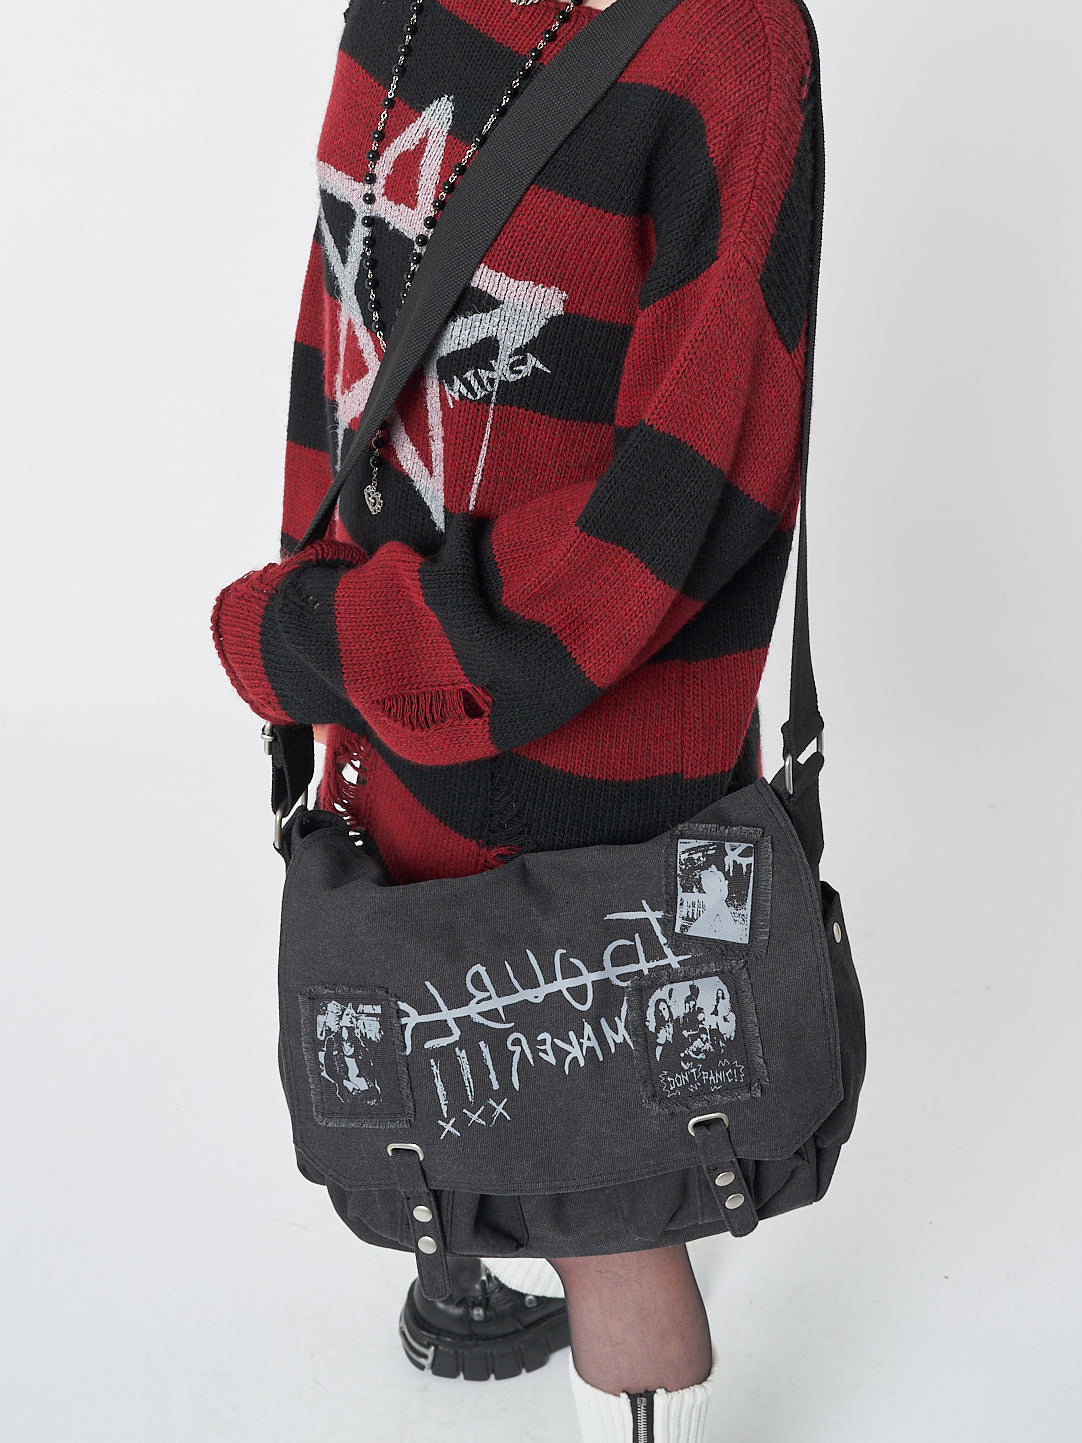 A versatile and edgy messenger bag made from durable black canvas, perfect for the rebellious and adventurous spirit.